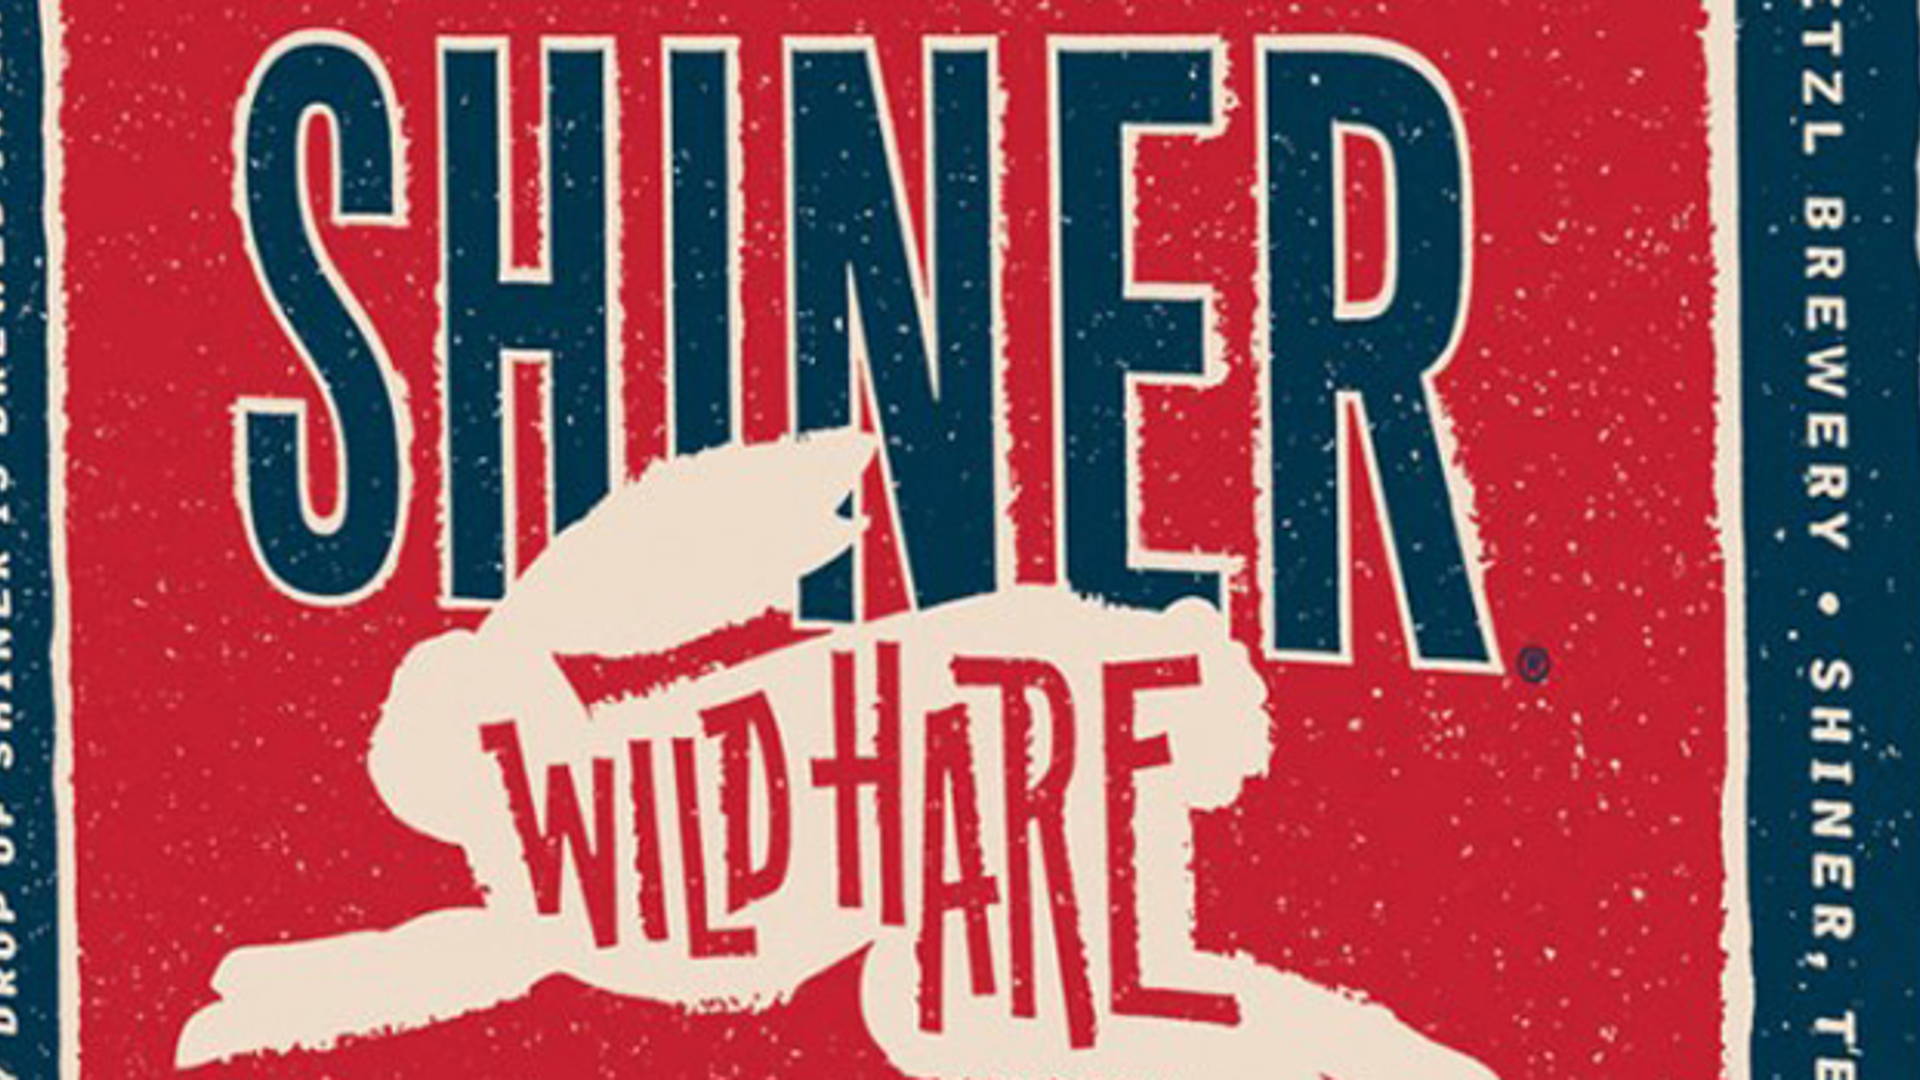 Featured image for Shiner Wild Hare Pale Ale